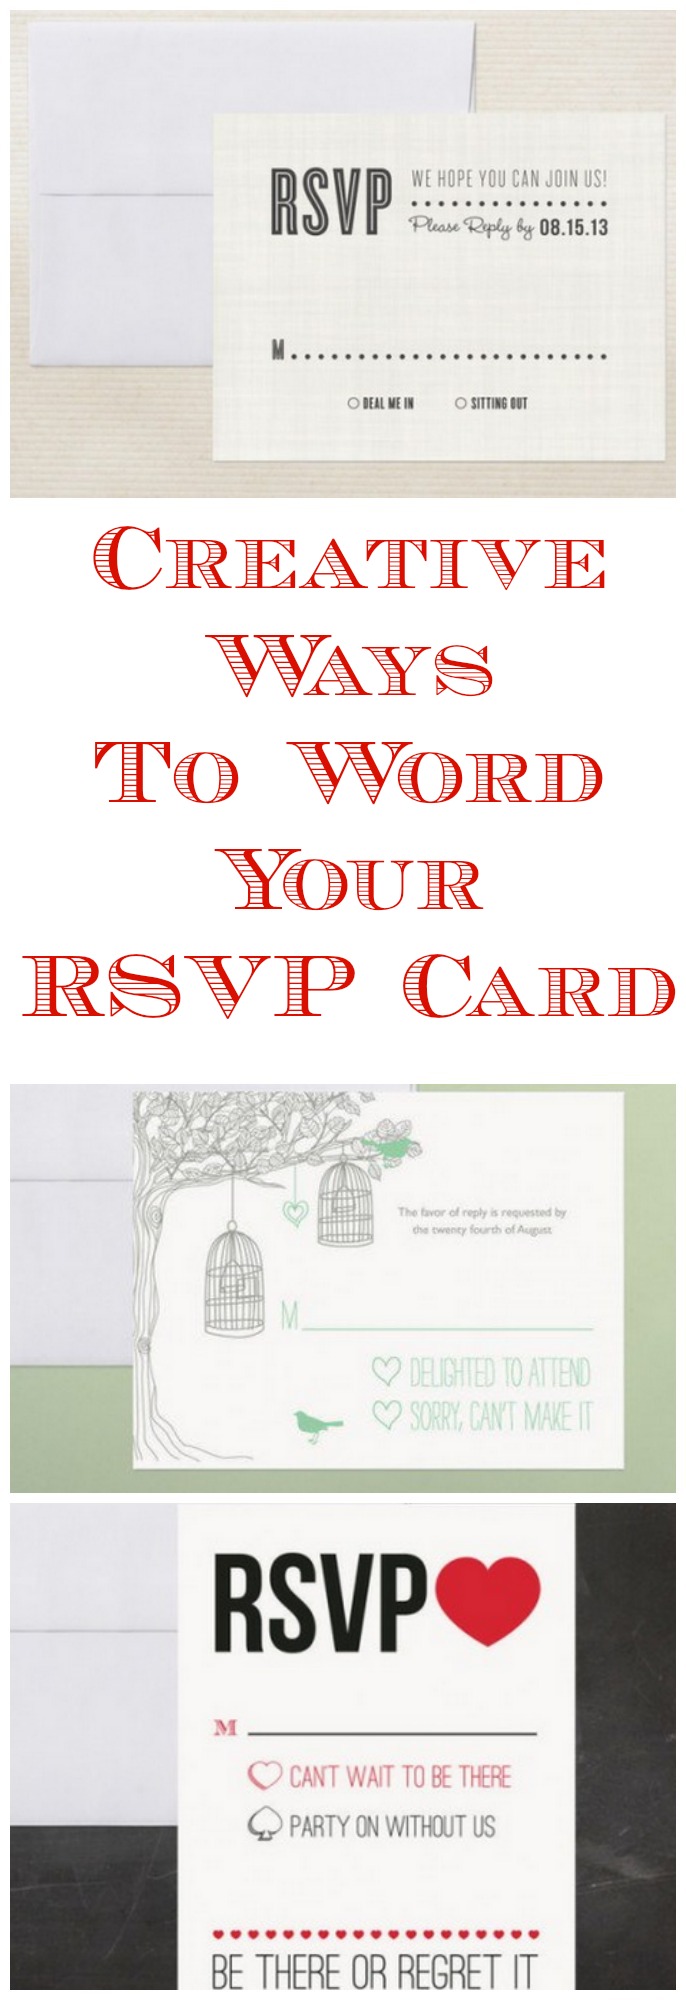 Wedding Rsvp Wording How to Uniquely Word Your Wedding RSVP Card